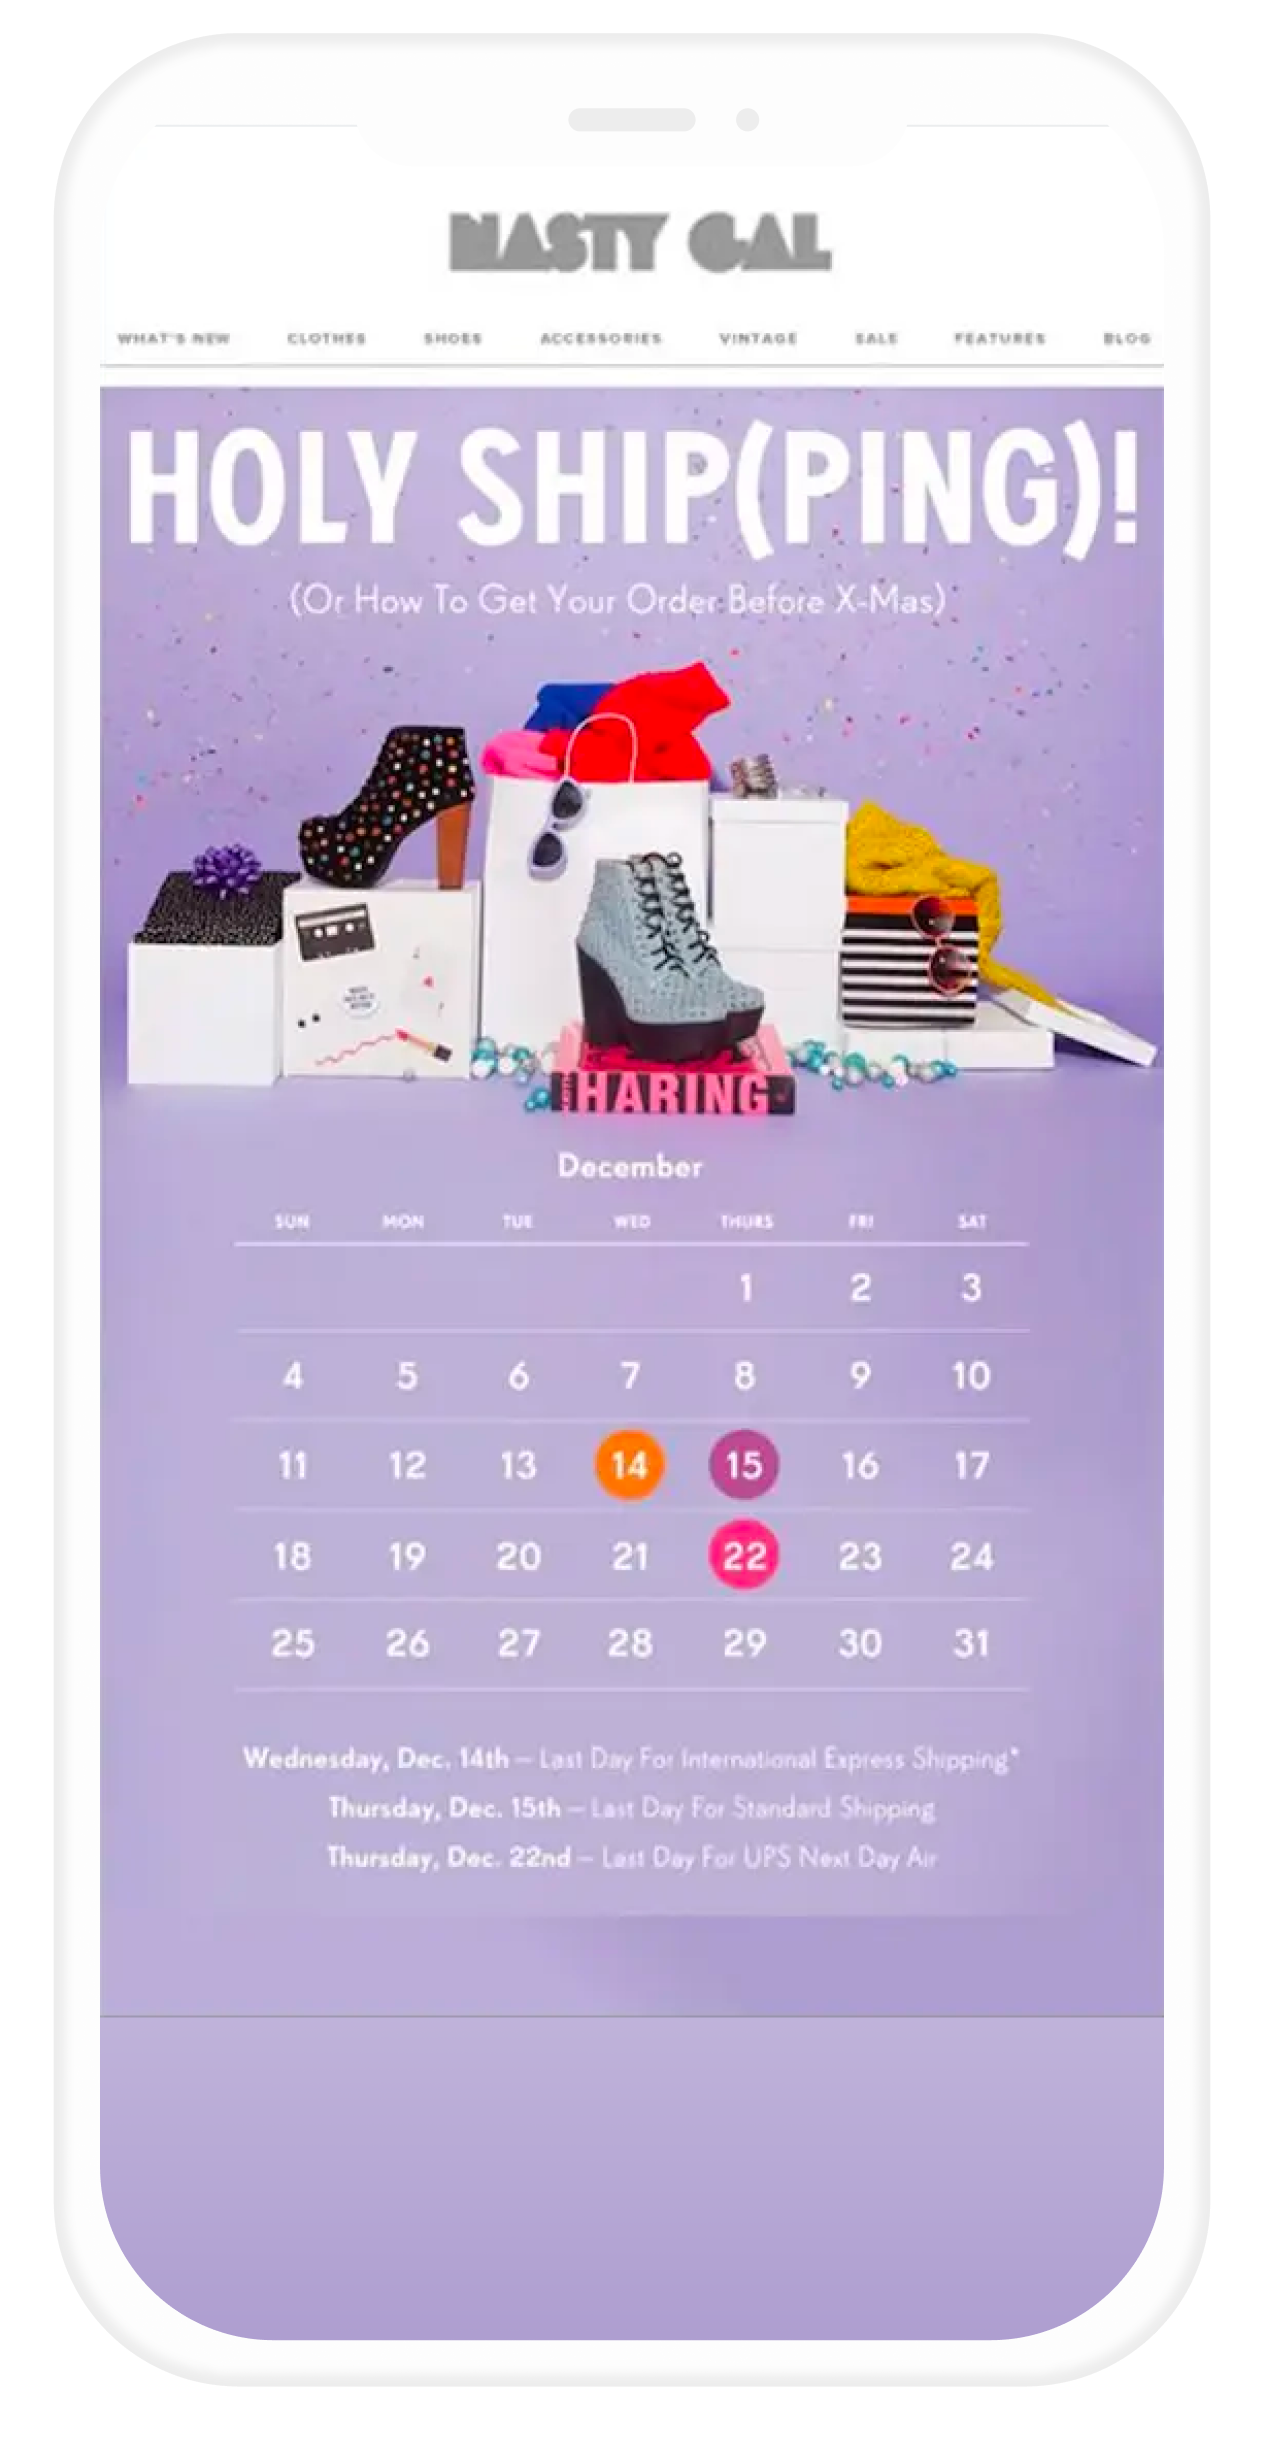 Nasty Gal email with calendar reminder